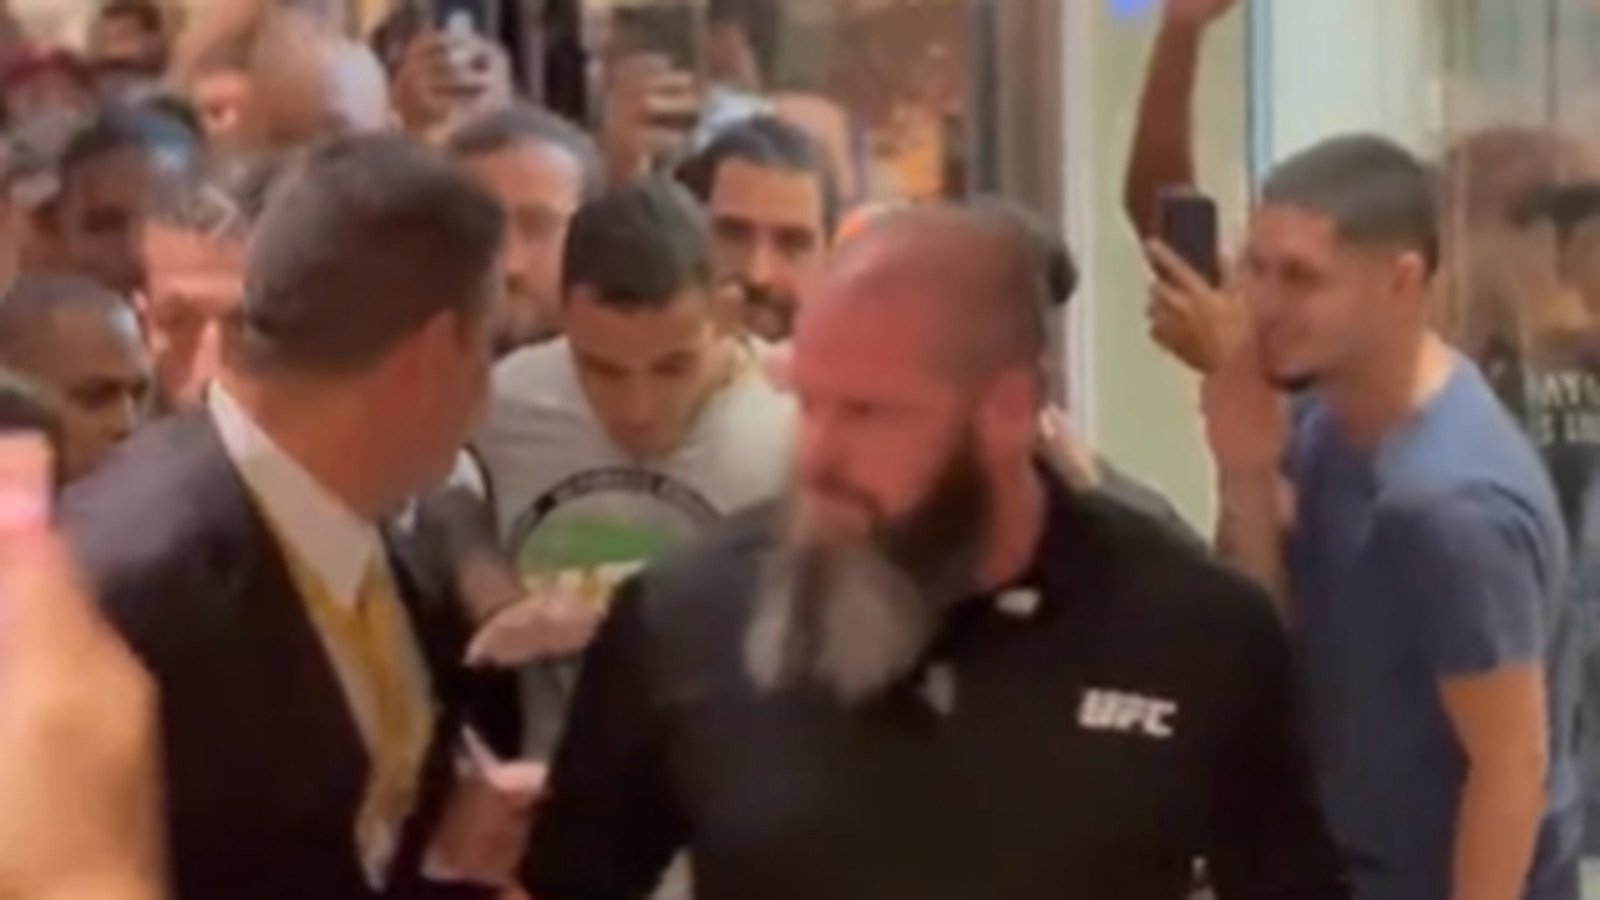 UFC 283 video: Charles Oliveira nearly mauled by wild fans at mall in Rio de Janeiro